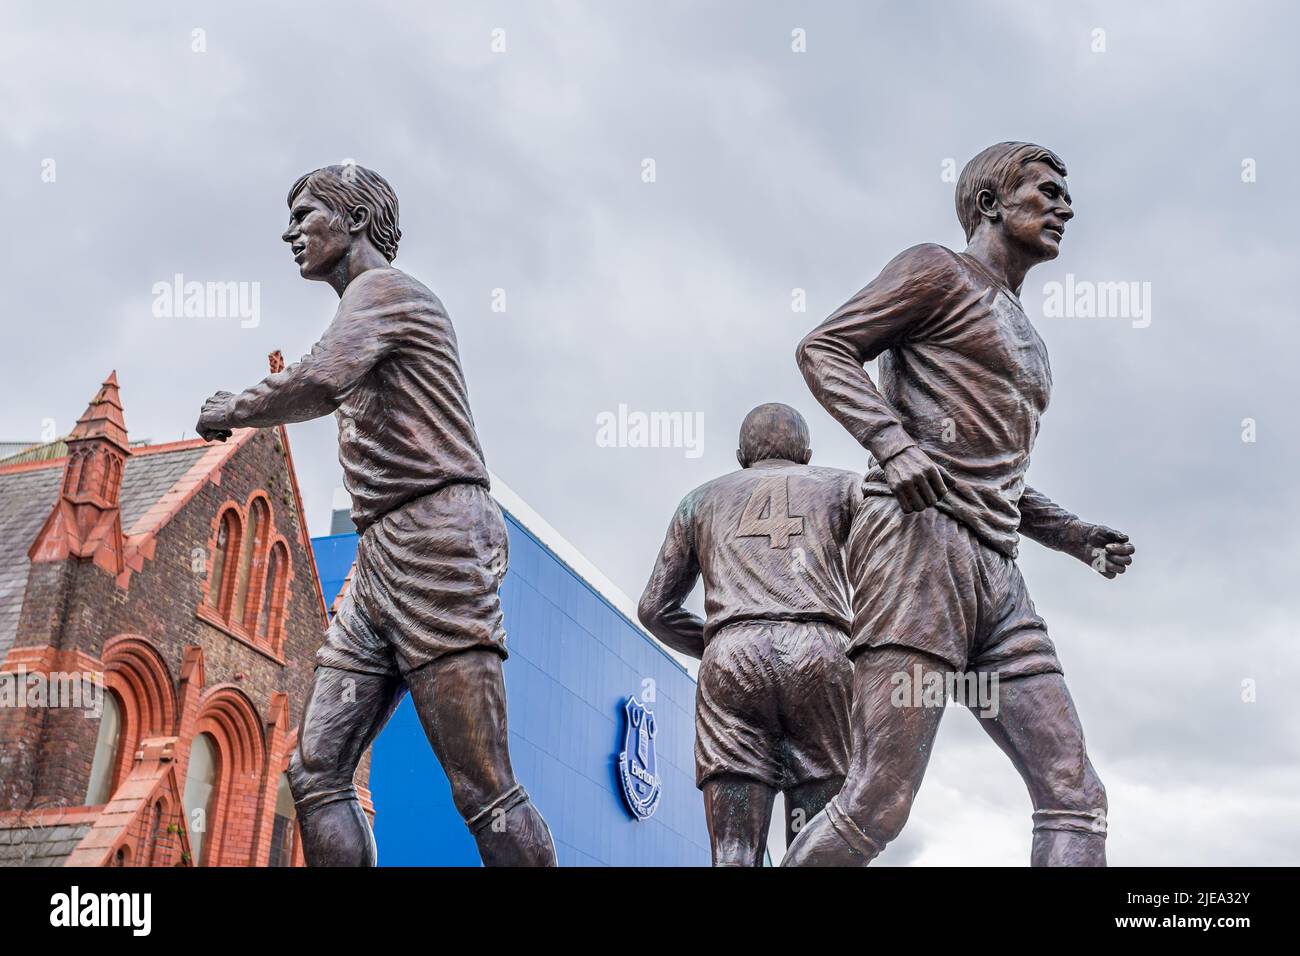 The Holy Trinity statue by Goodison Park seen in June 2022 in Liverpool featuring Everton Football Club legends Howard Kendall, Alan Ball, Colin Harve Stock Photo